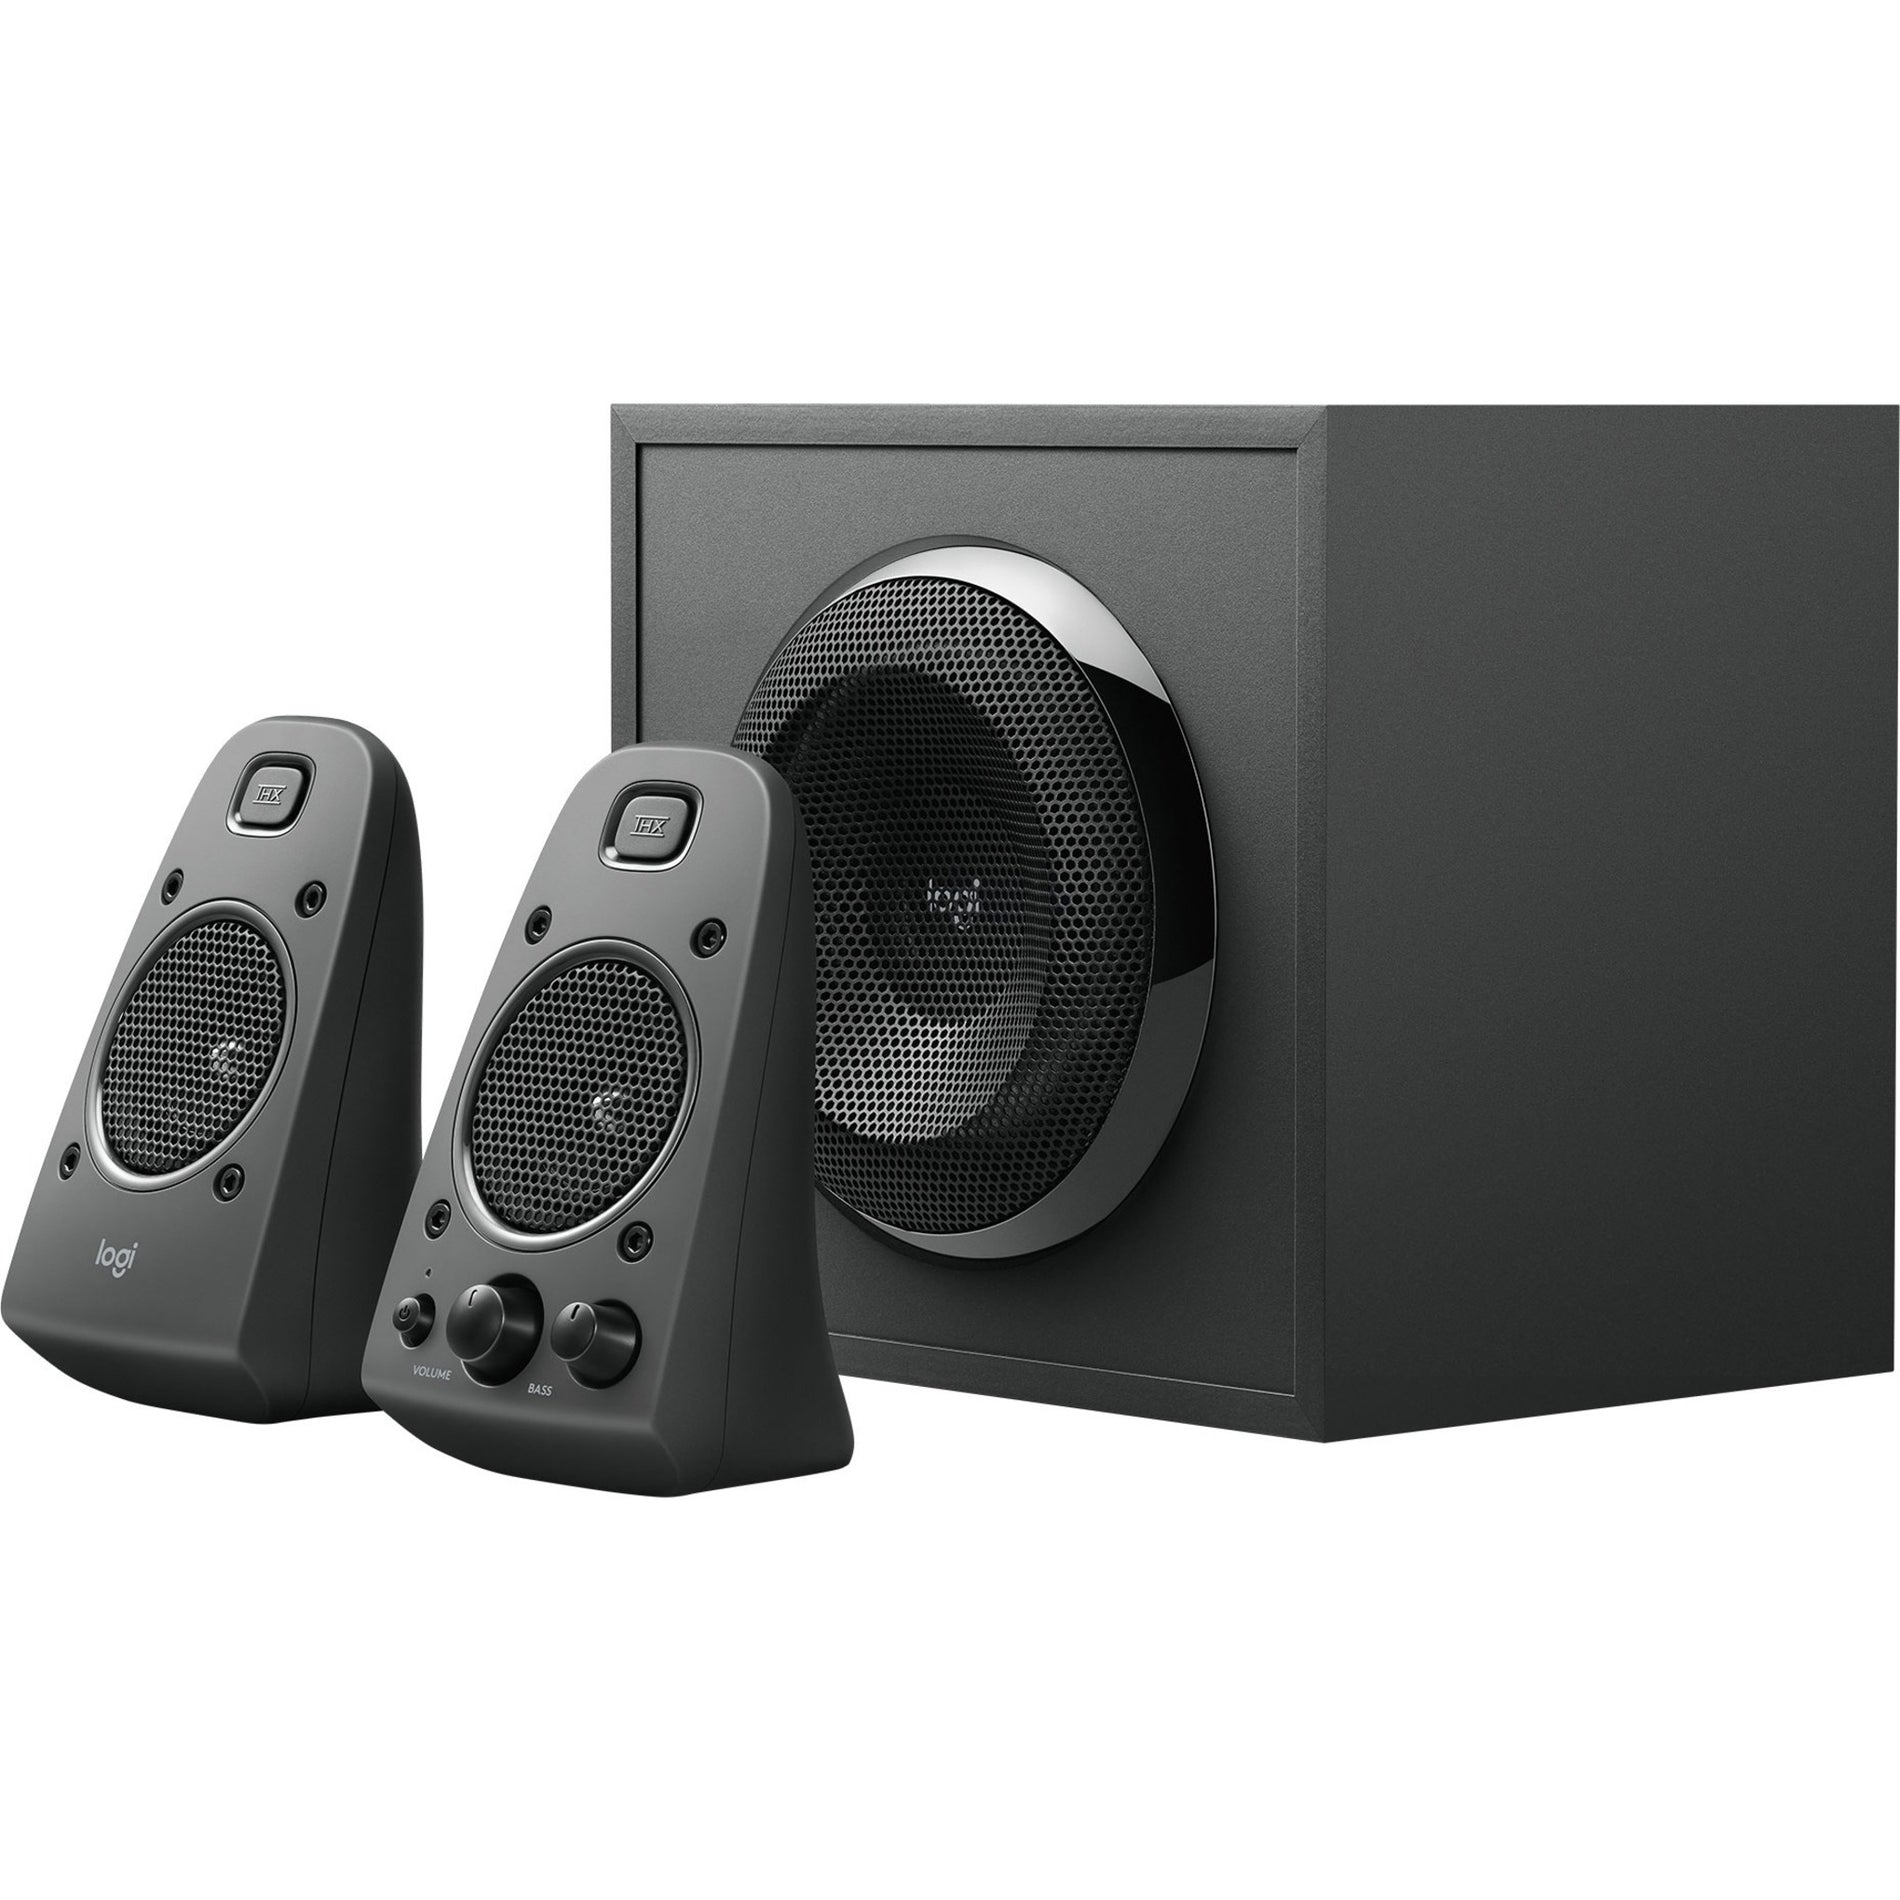 Logitech 980-001258 Z625 Speaker System with Subwoofer and Optical Input, 200 W RMS, Black